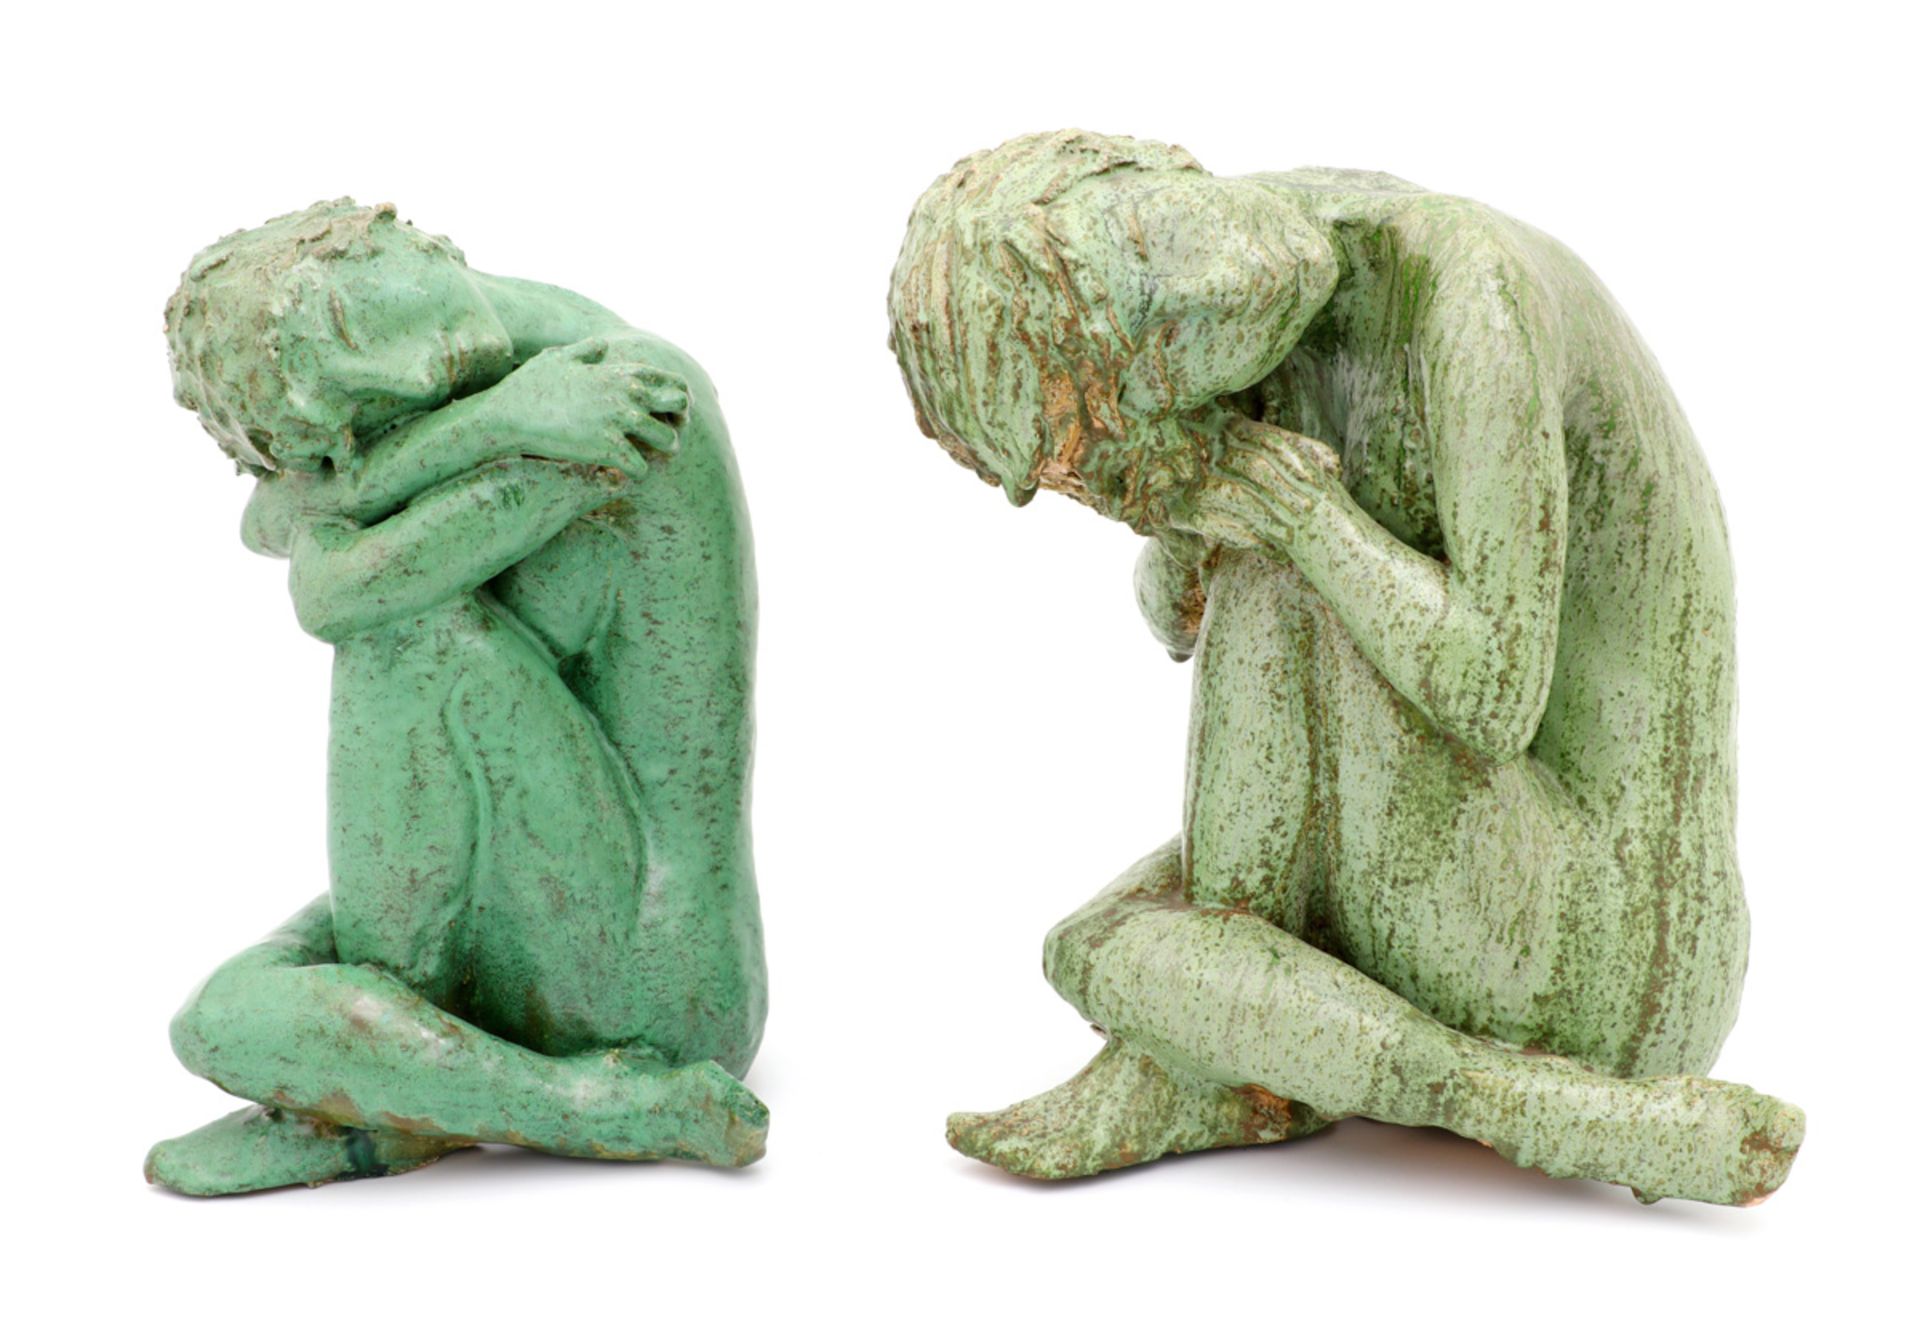 TWO SEATED FEMALE FIGURES Glazed terracotta sculptures, celadon decoration, depicting seated